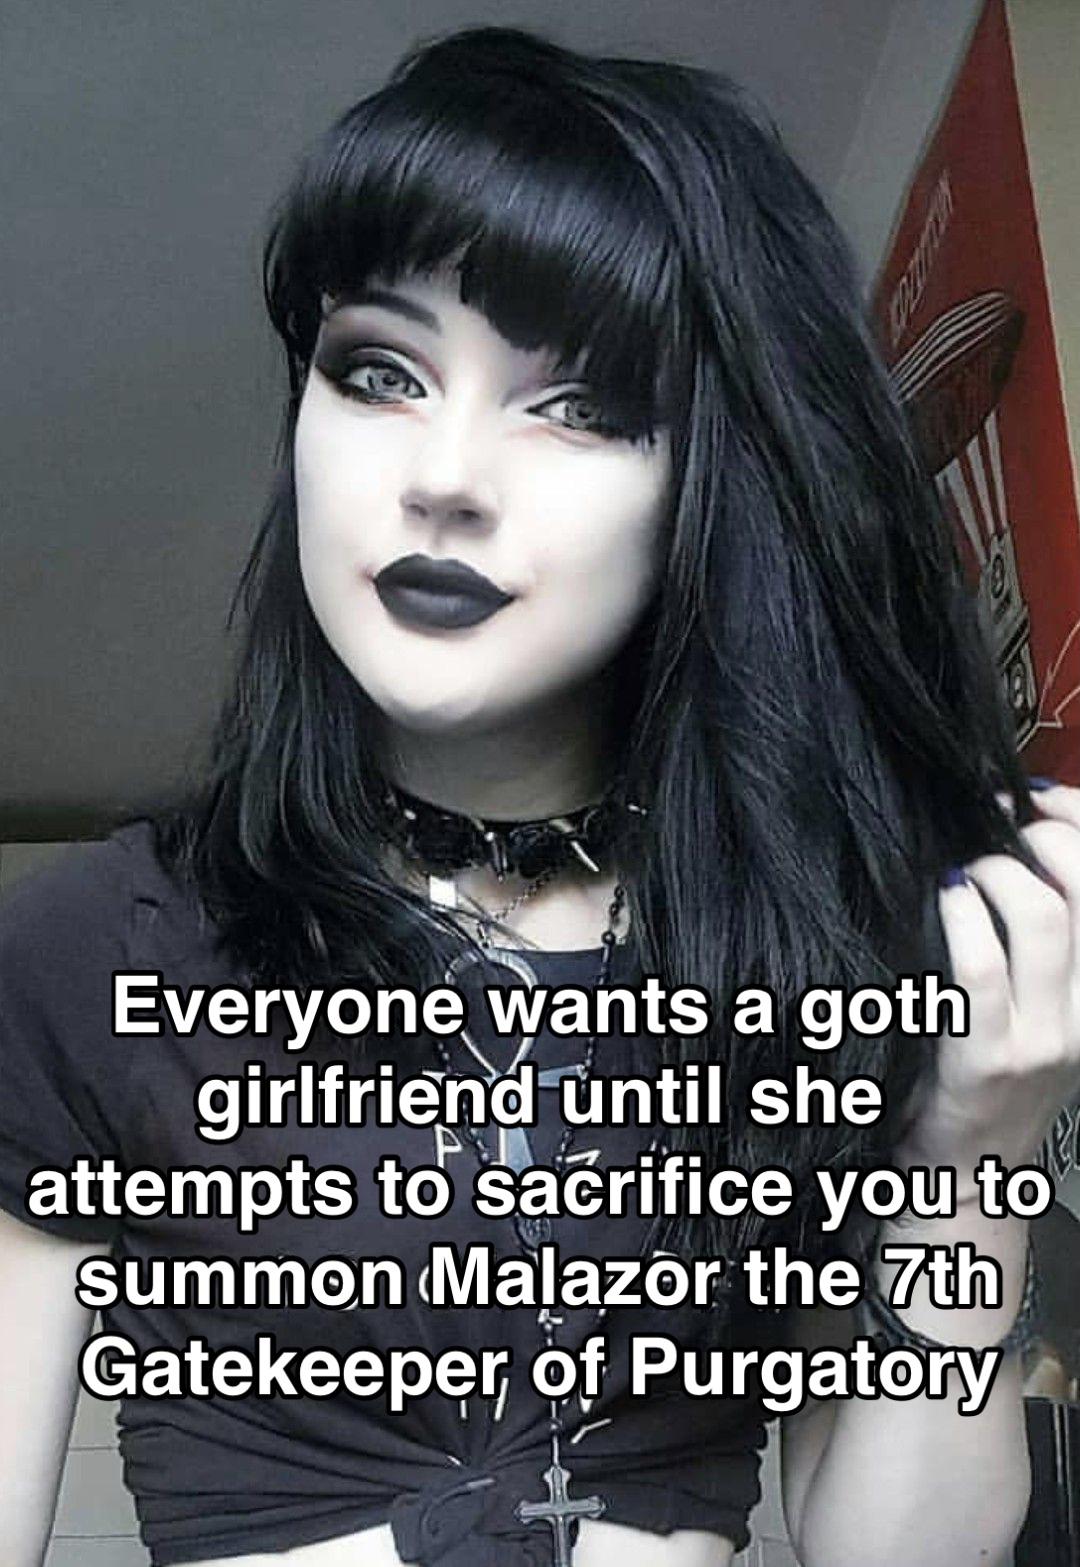 funny memes and pics - emo pin up girl - Everyone wants a goth girlfriend until she P Looney attempts to sacrifice you to summon Malazor the 7th Gatekeeper of Purgatory